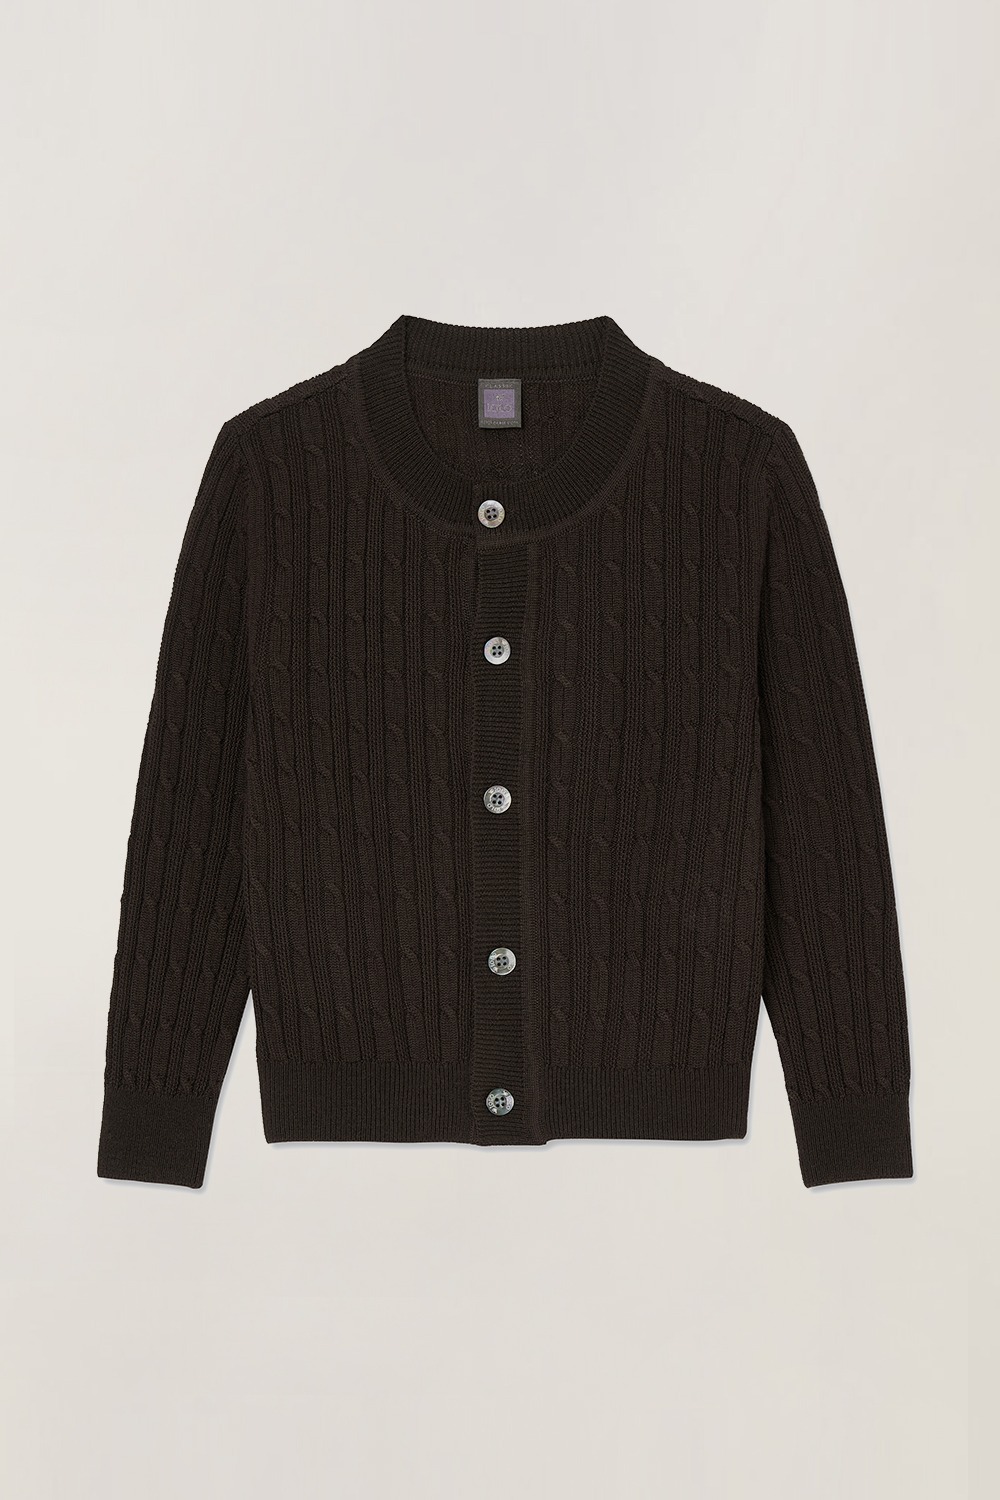 Kids Vertical Cable Cardigan_Brown